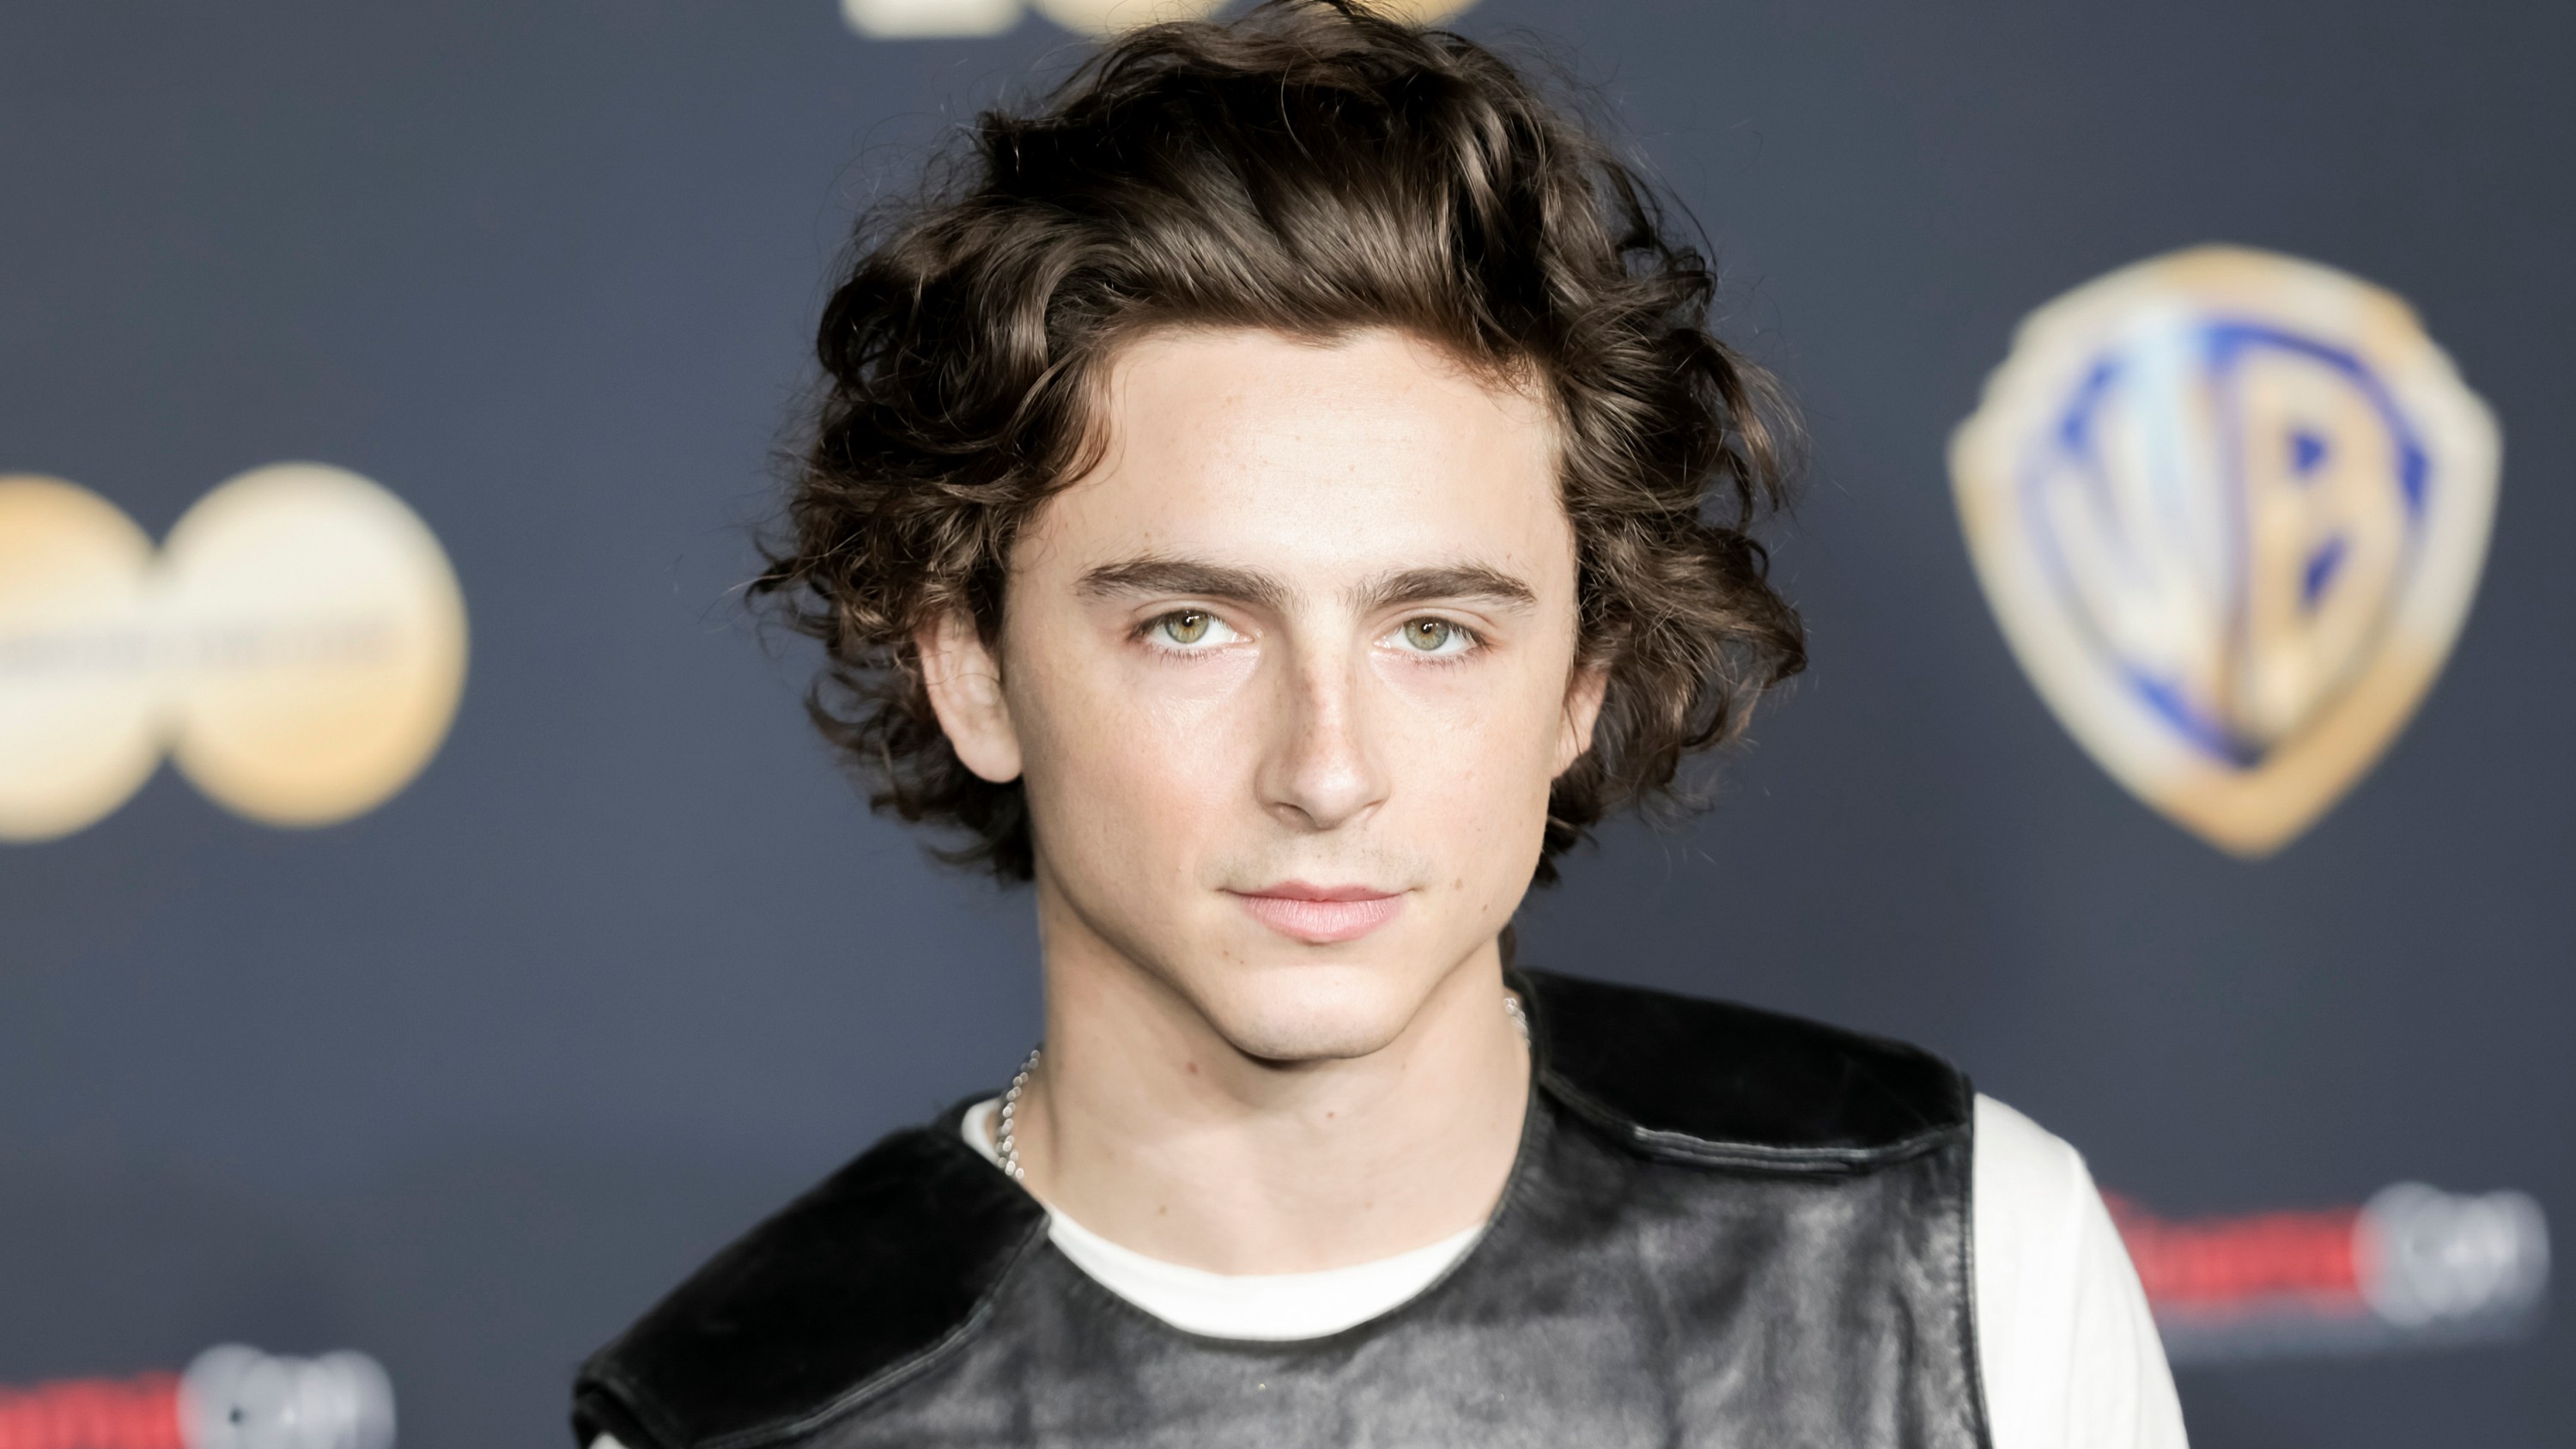 LAS VEGAS, NEVADA - APRIL 25: Timothee Chalamet attends the red carpet promoting the upcoming movie Dune: Part Two at the Warner Bros.  Pictures Studio presentation during CinemaCon, the official meeting of the National Association of Theater Owners, at the Colosseum in Caesars Palace.  on April 25, 2023 in Las Vegas, Nevada.  (Photo by Greg Doherty/WireImage)